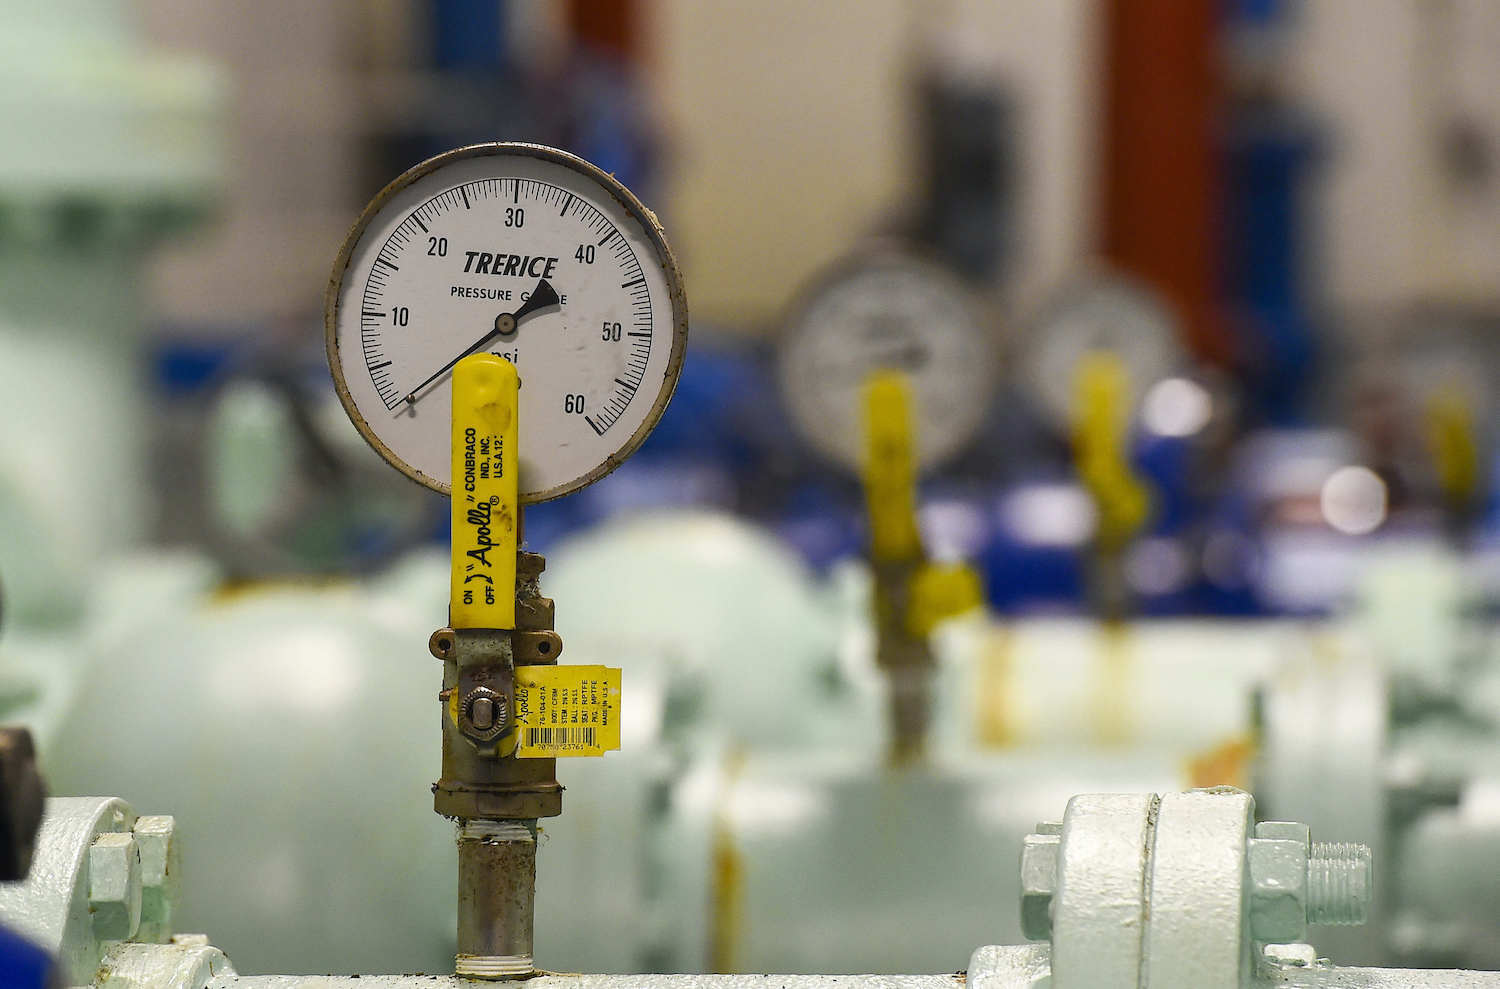 A vast array of pipes, valves and control boards monitor and control the water as it flows through different parts of the plant in the Fairmont Water Treatment Plant, July 16, in Fairmont MN. August 2021